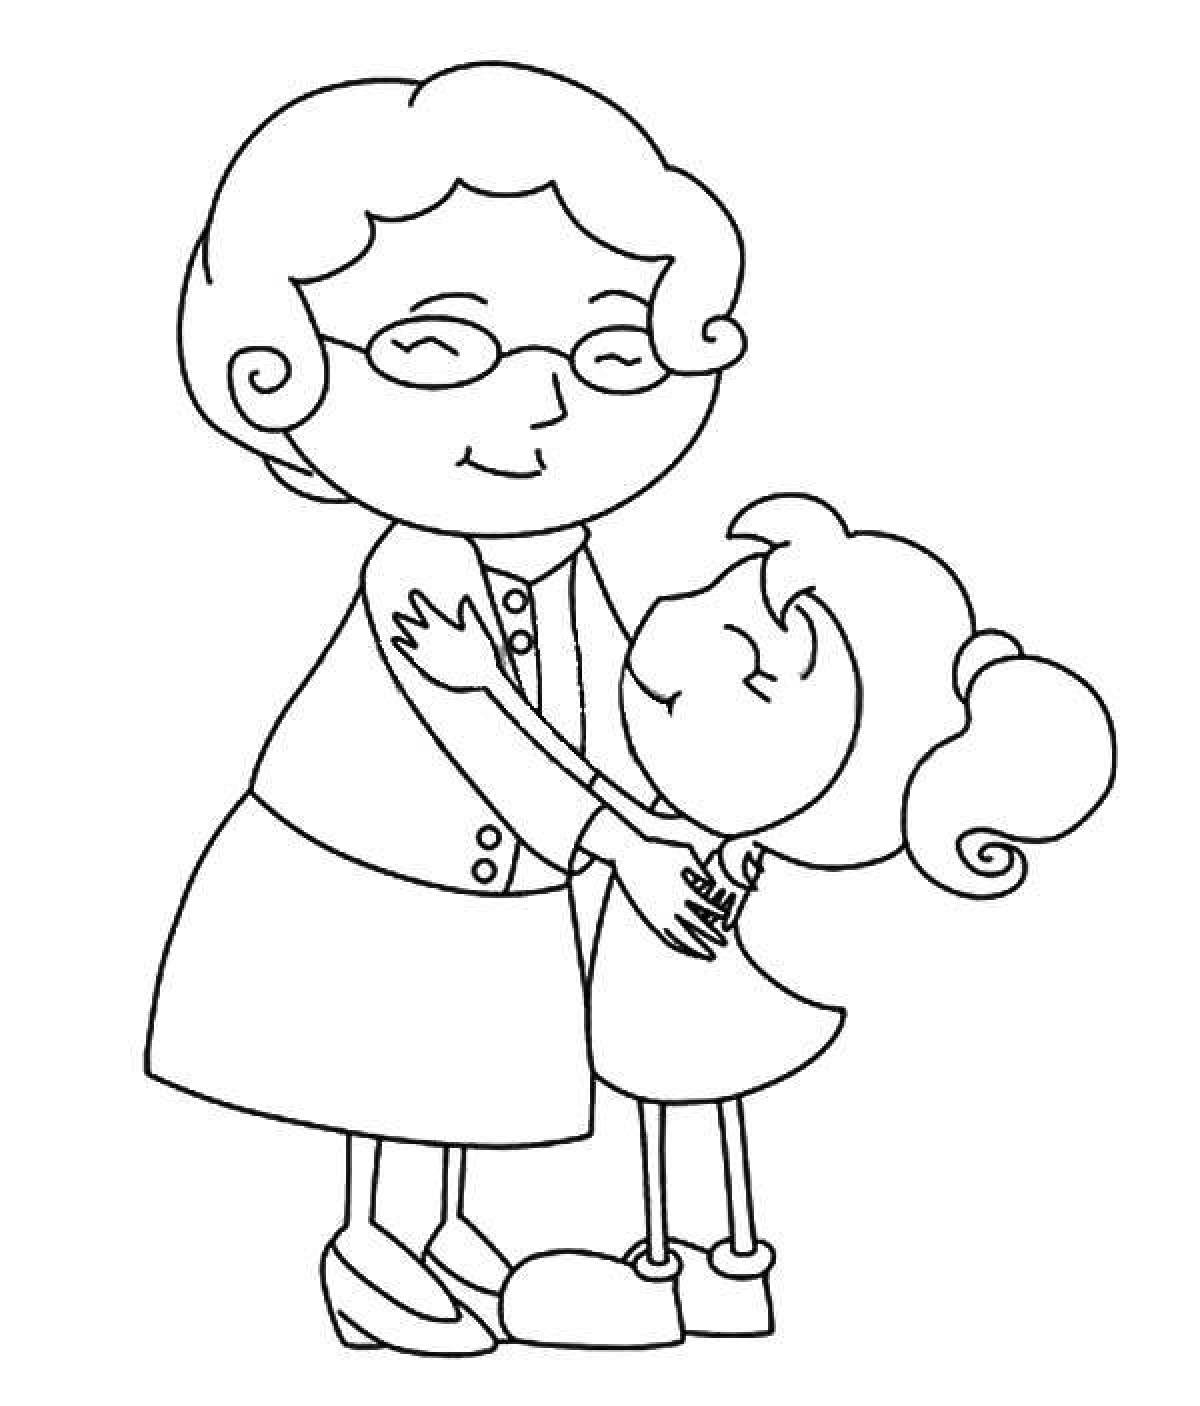 Precious grandmother and granddaughter coloring pages